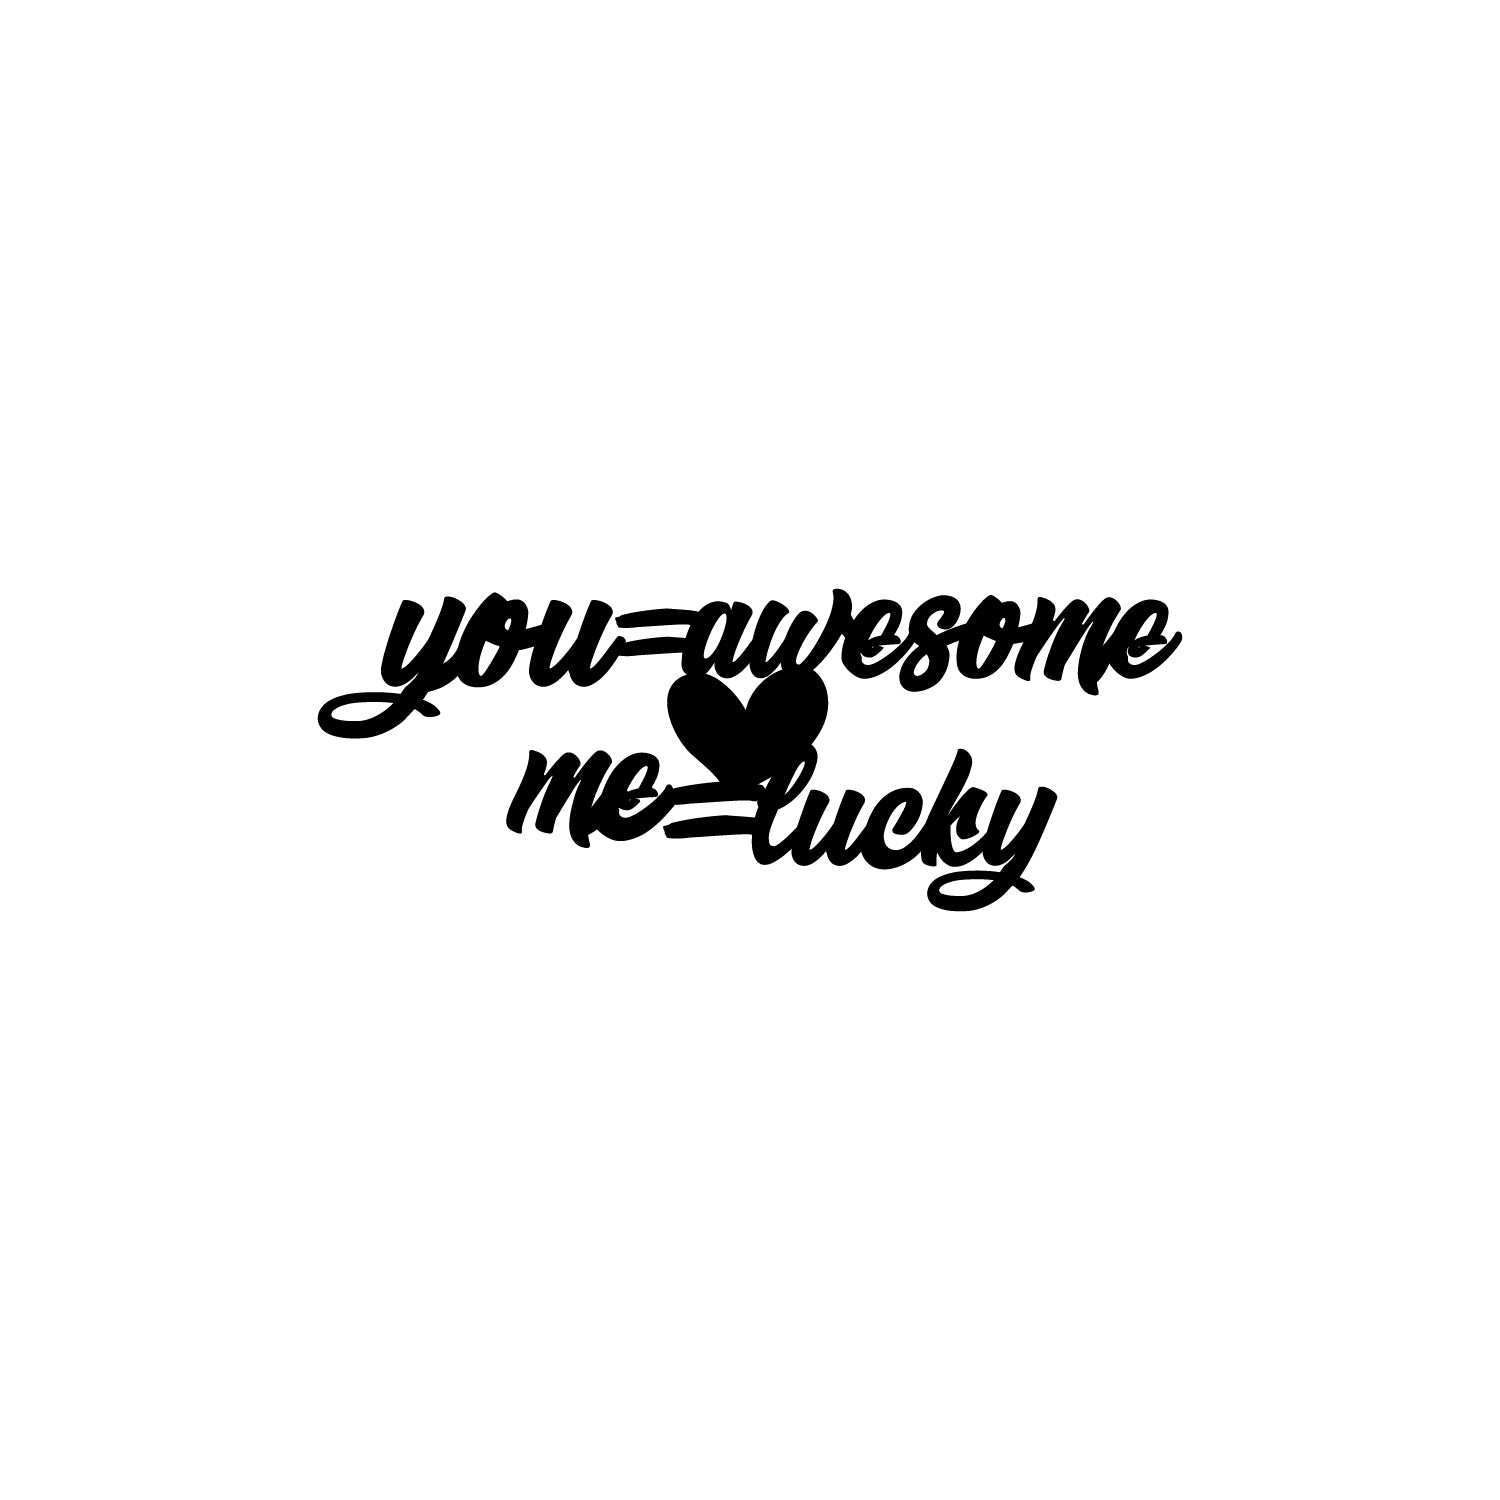 You Awesome, Me Lucky Love Theme Black Engineered Wood Wall Art Cutout, Ready To Hang Home Decor 2